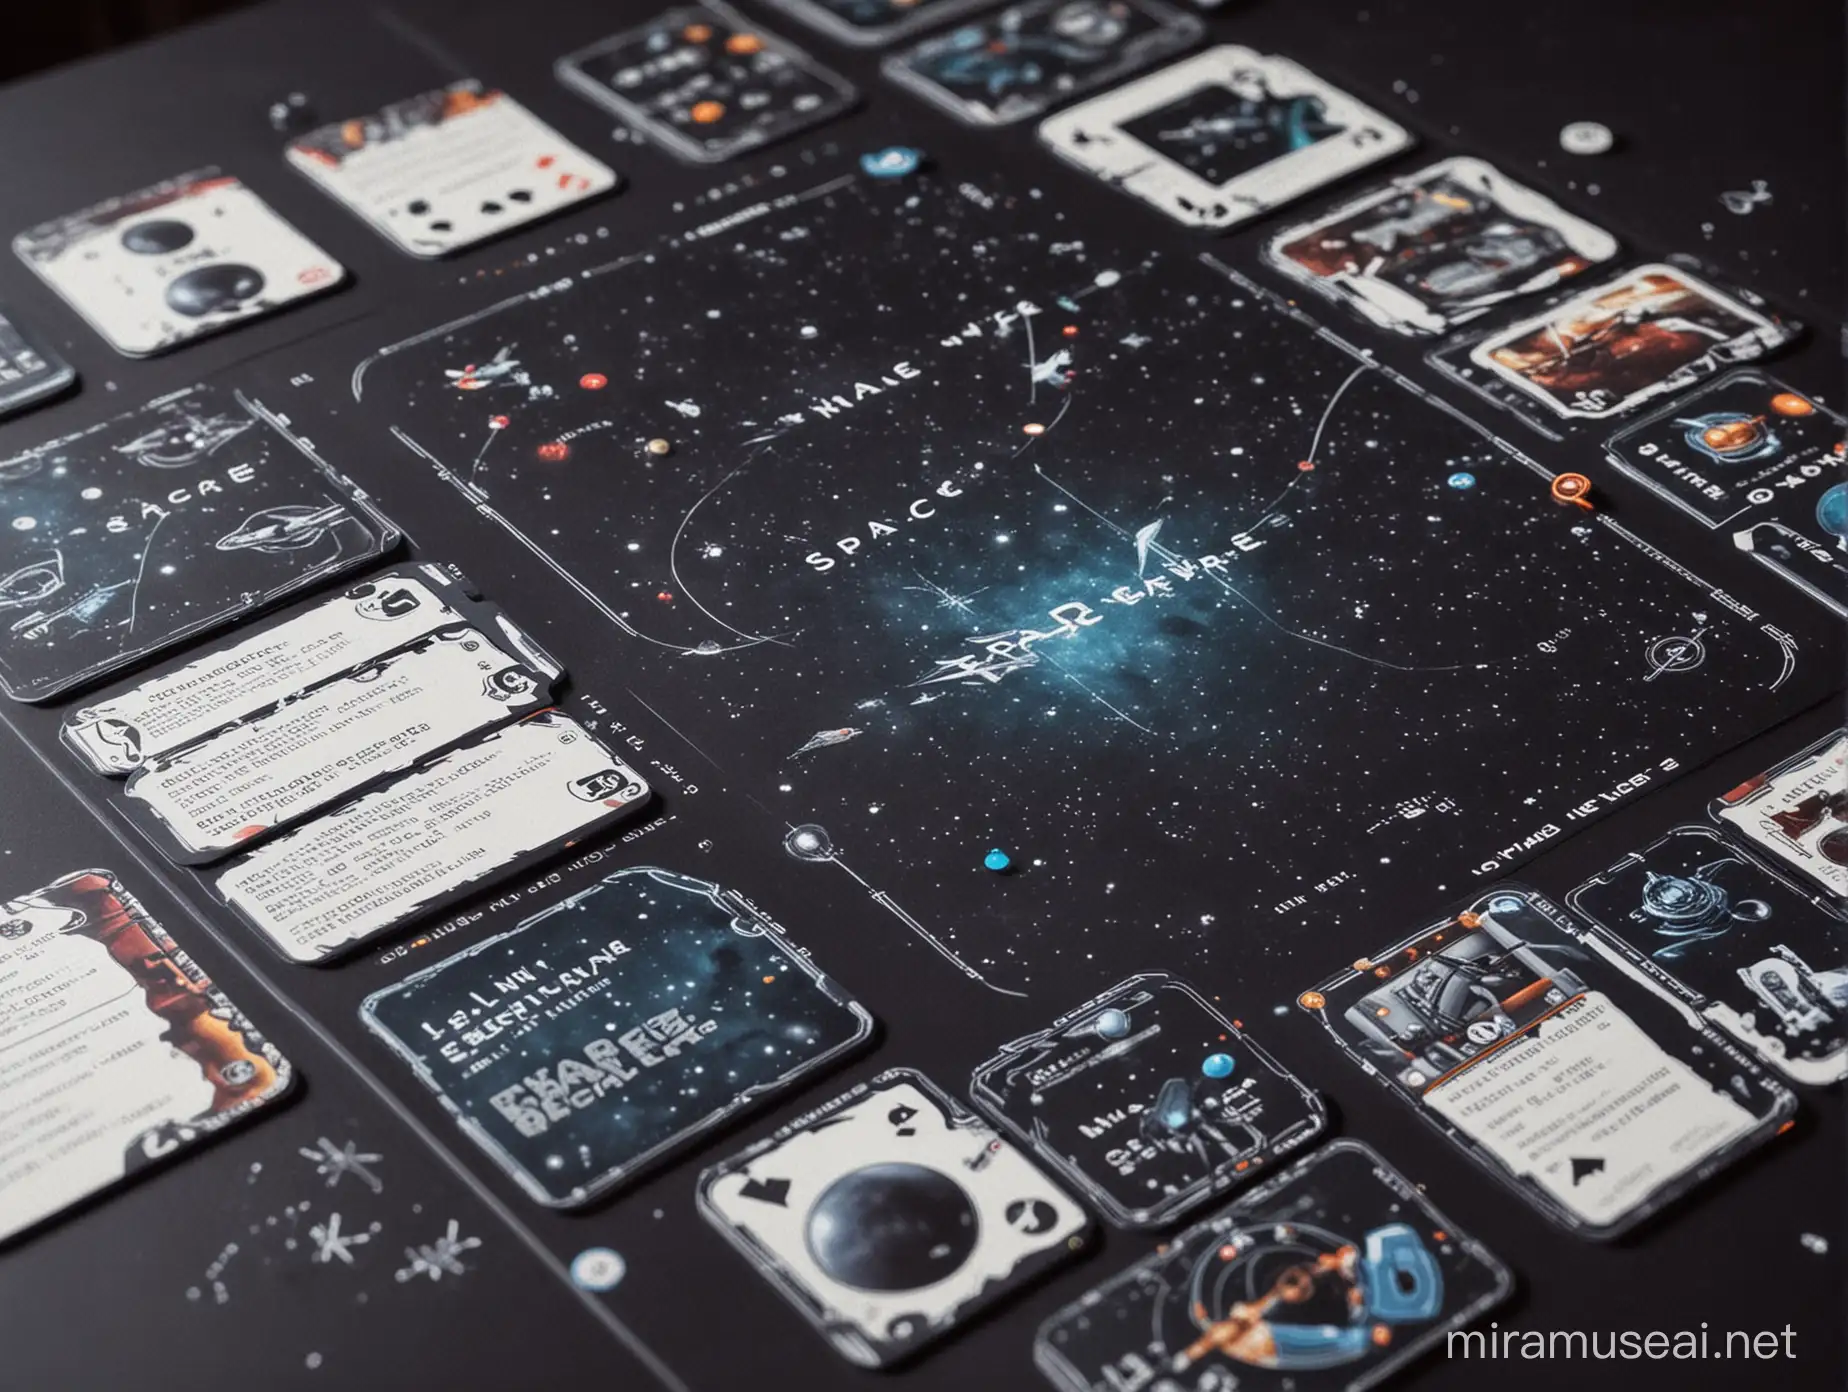 board game and board game cards of space board game using the visual identity of start wars but with a minimalist touch for board games